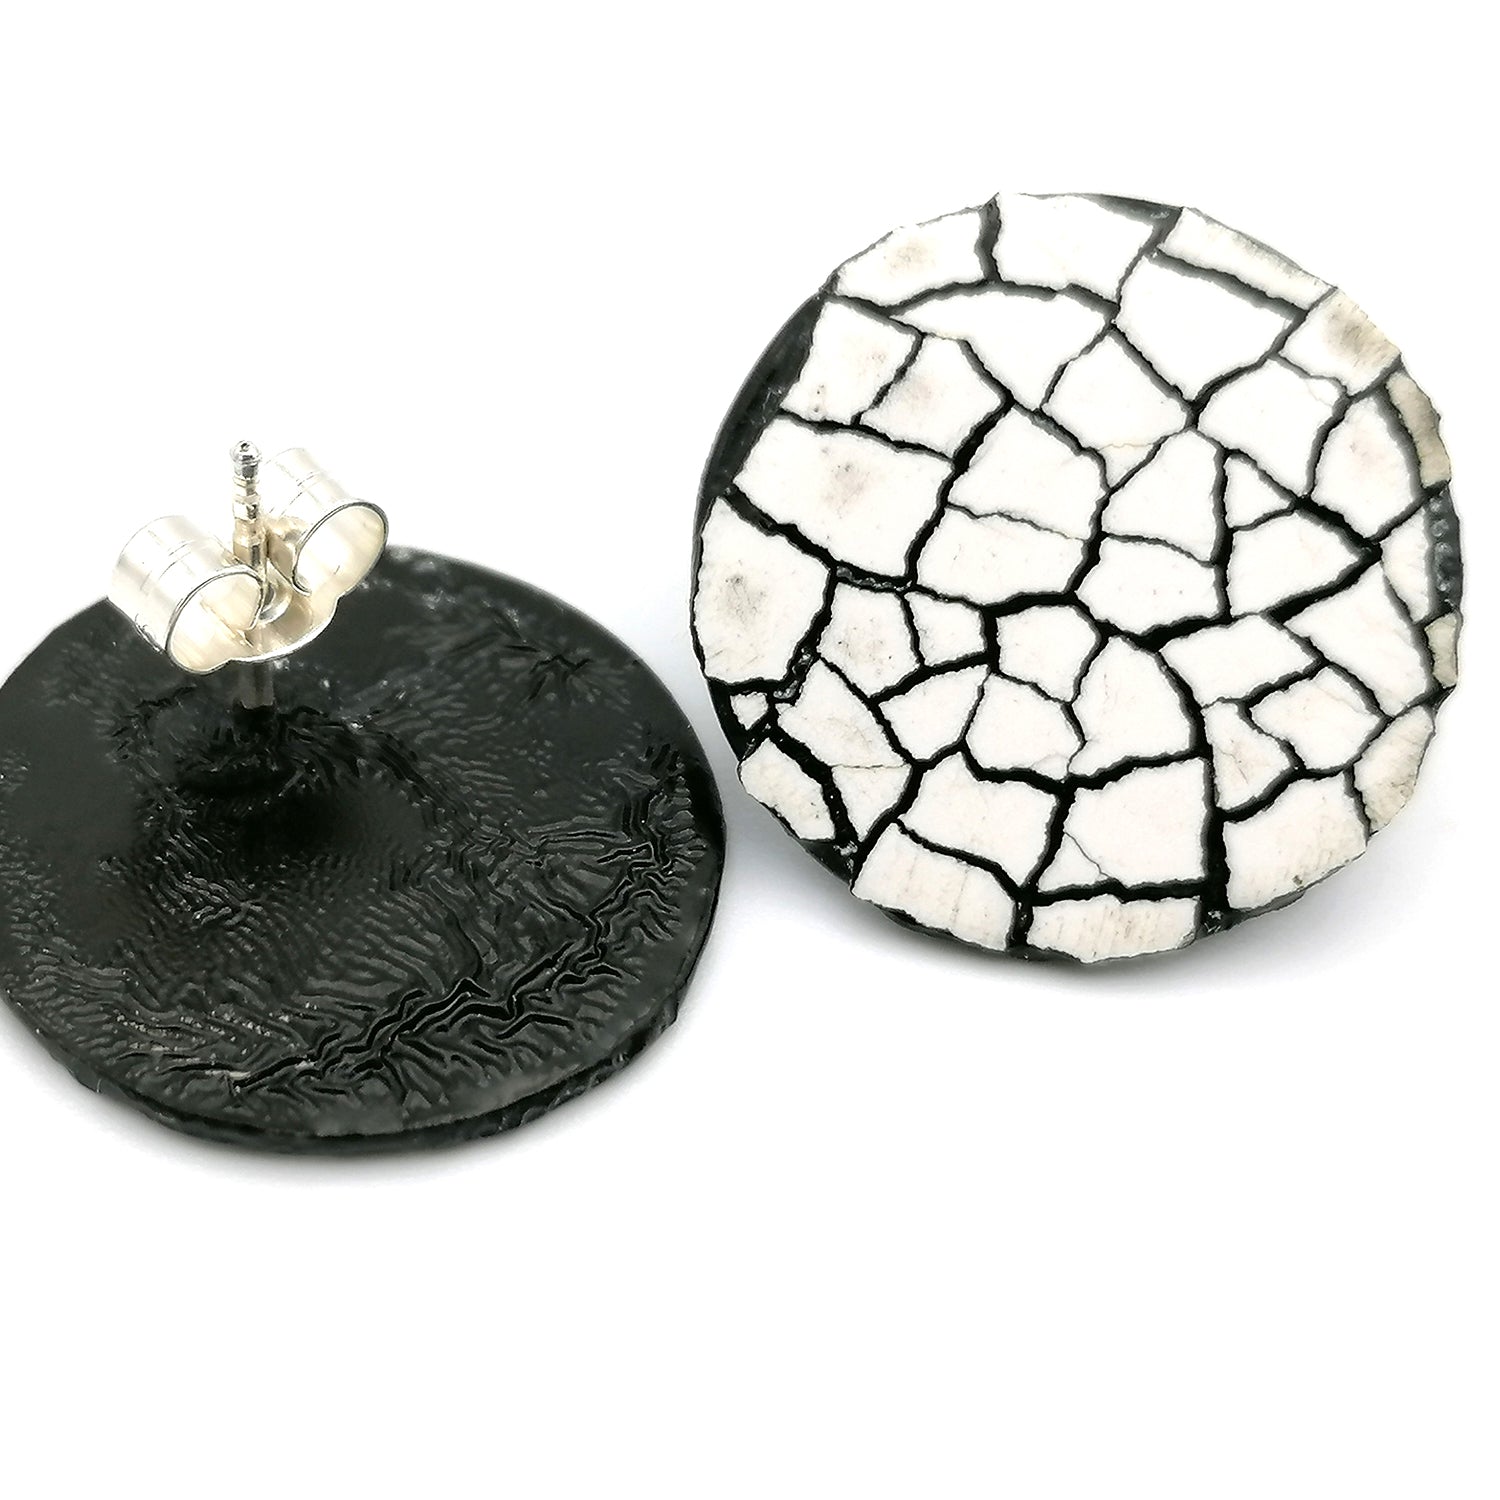 Image shows two round stud modern mosaic earrings made using the Rankaku technique using real eggshell, white on black. One earring is upside down showing the sterling silver earring post